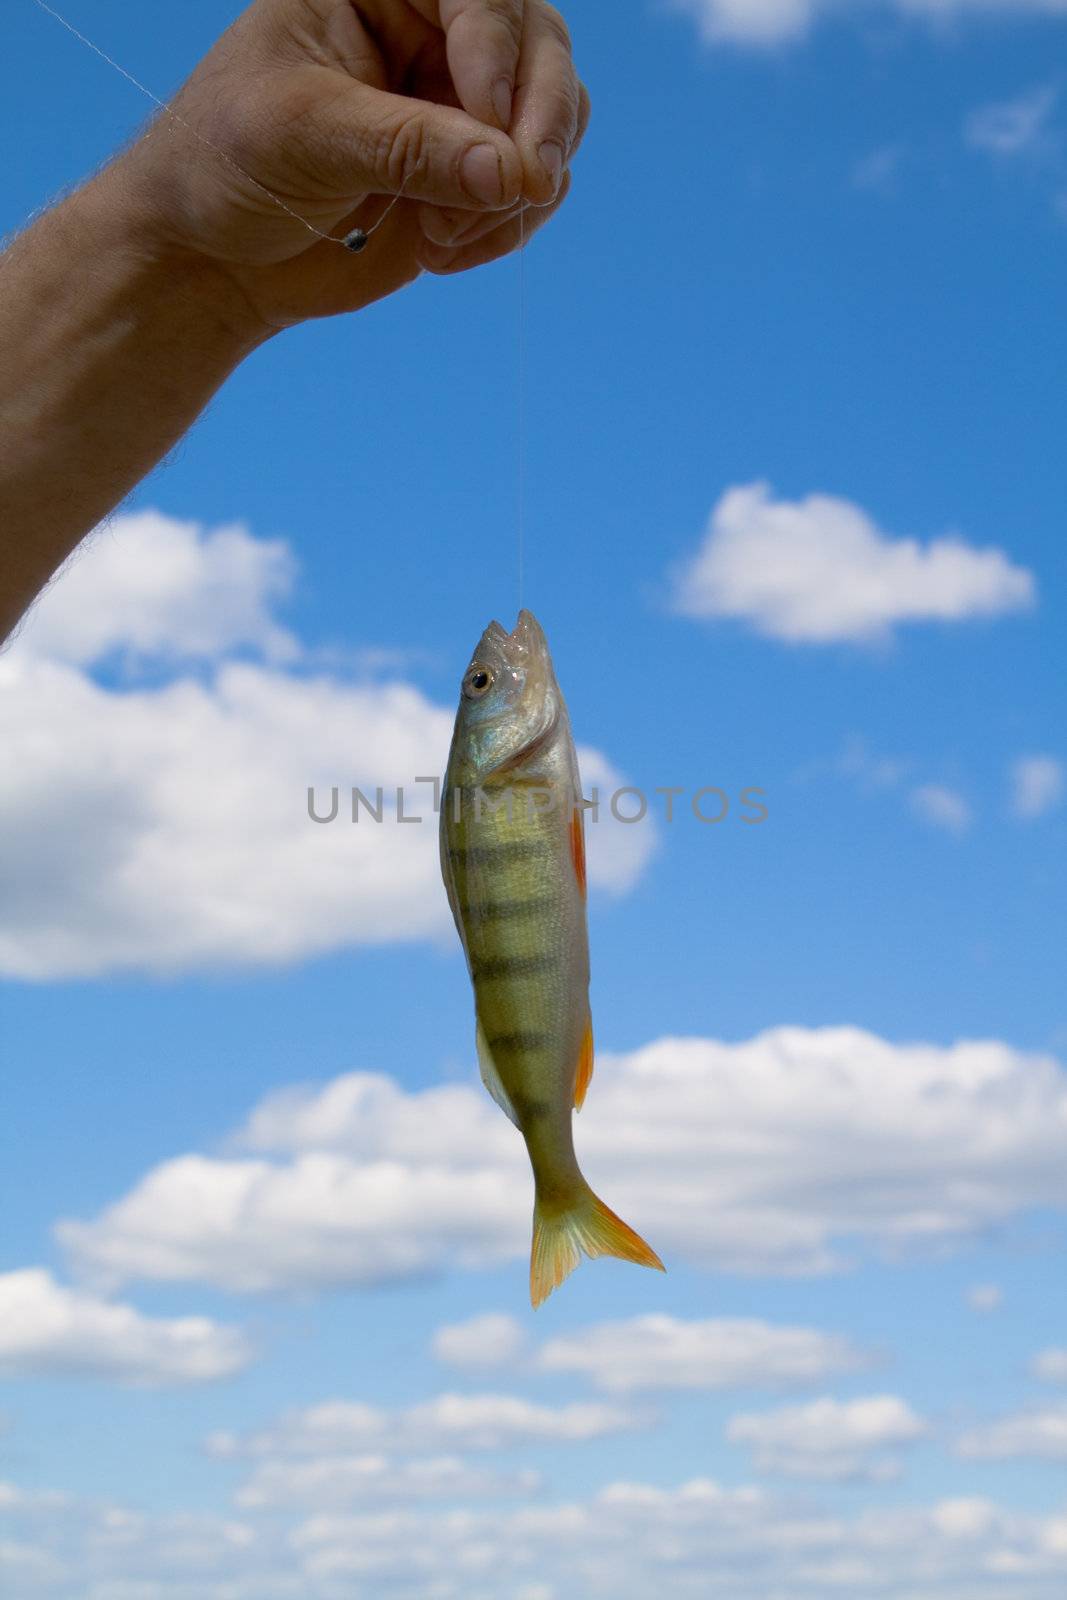 Hand holding a fish caught on a fishing line with clouds